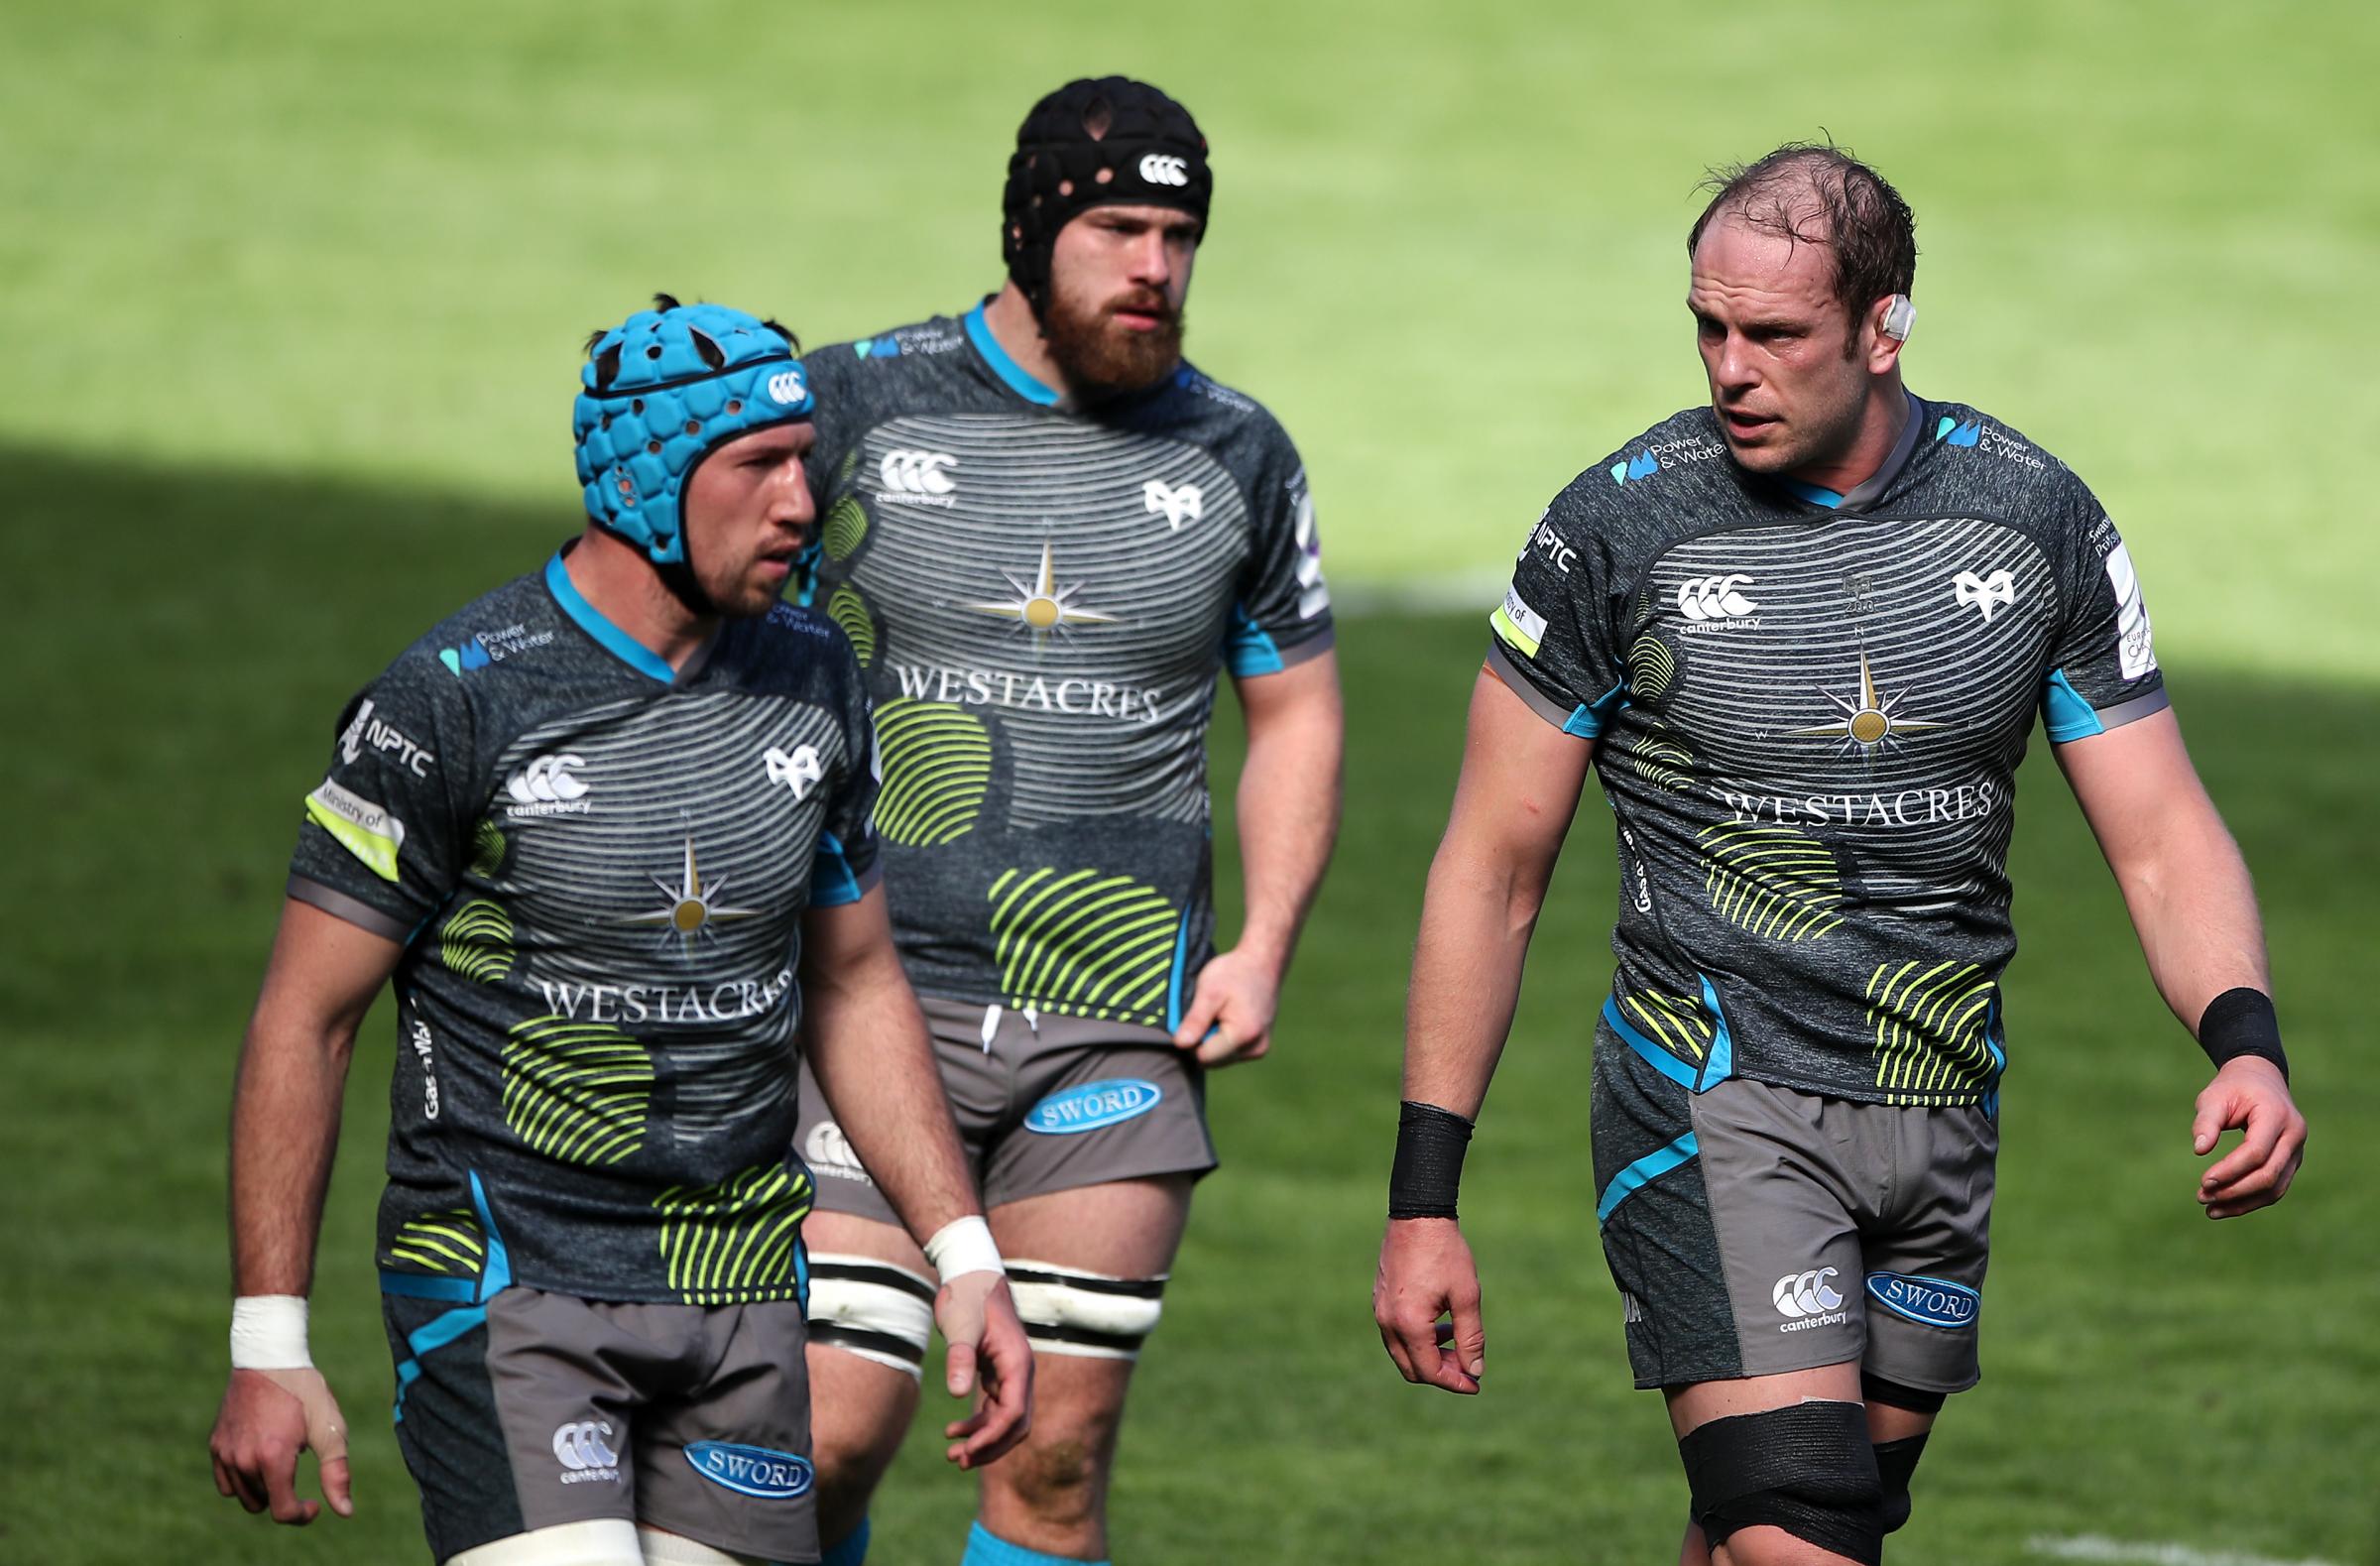 Ospreys Alun Wyn Jones (right) speaks with Justin Tipuric during the Heineken Challenge Cup match at Liberty Stadium, Swansea. Picture date: Saturday April 3, 2021.